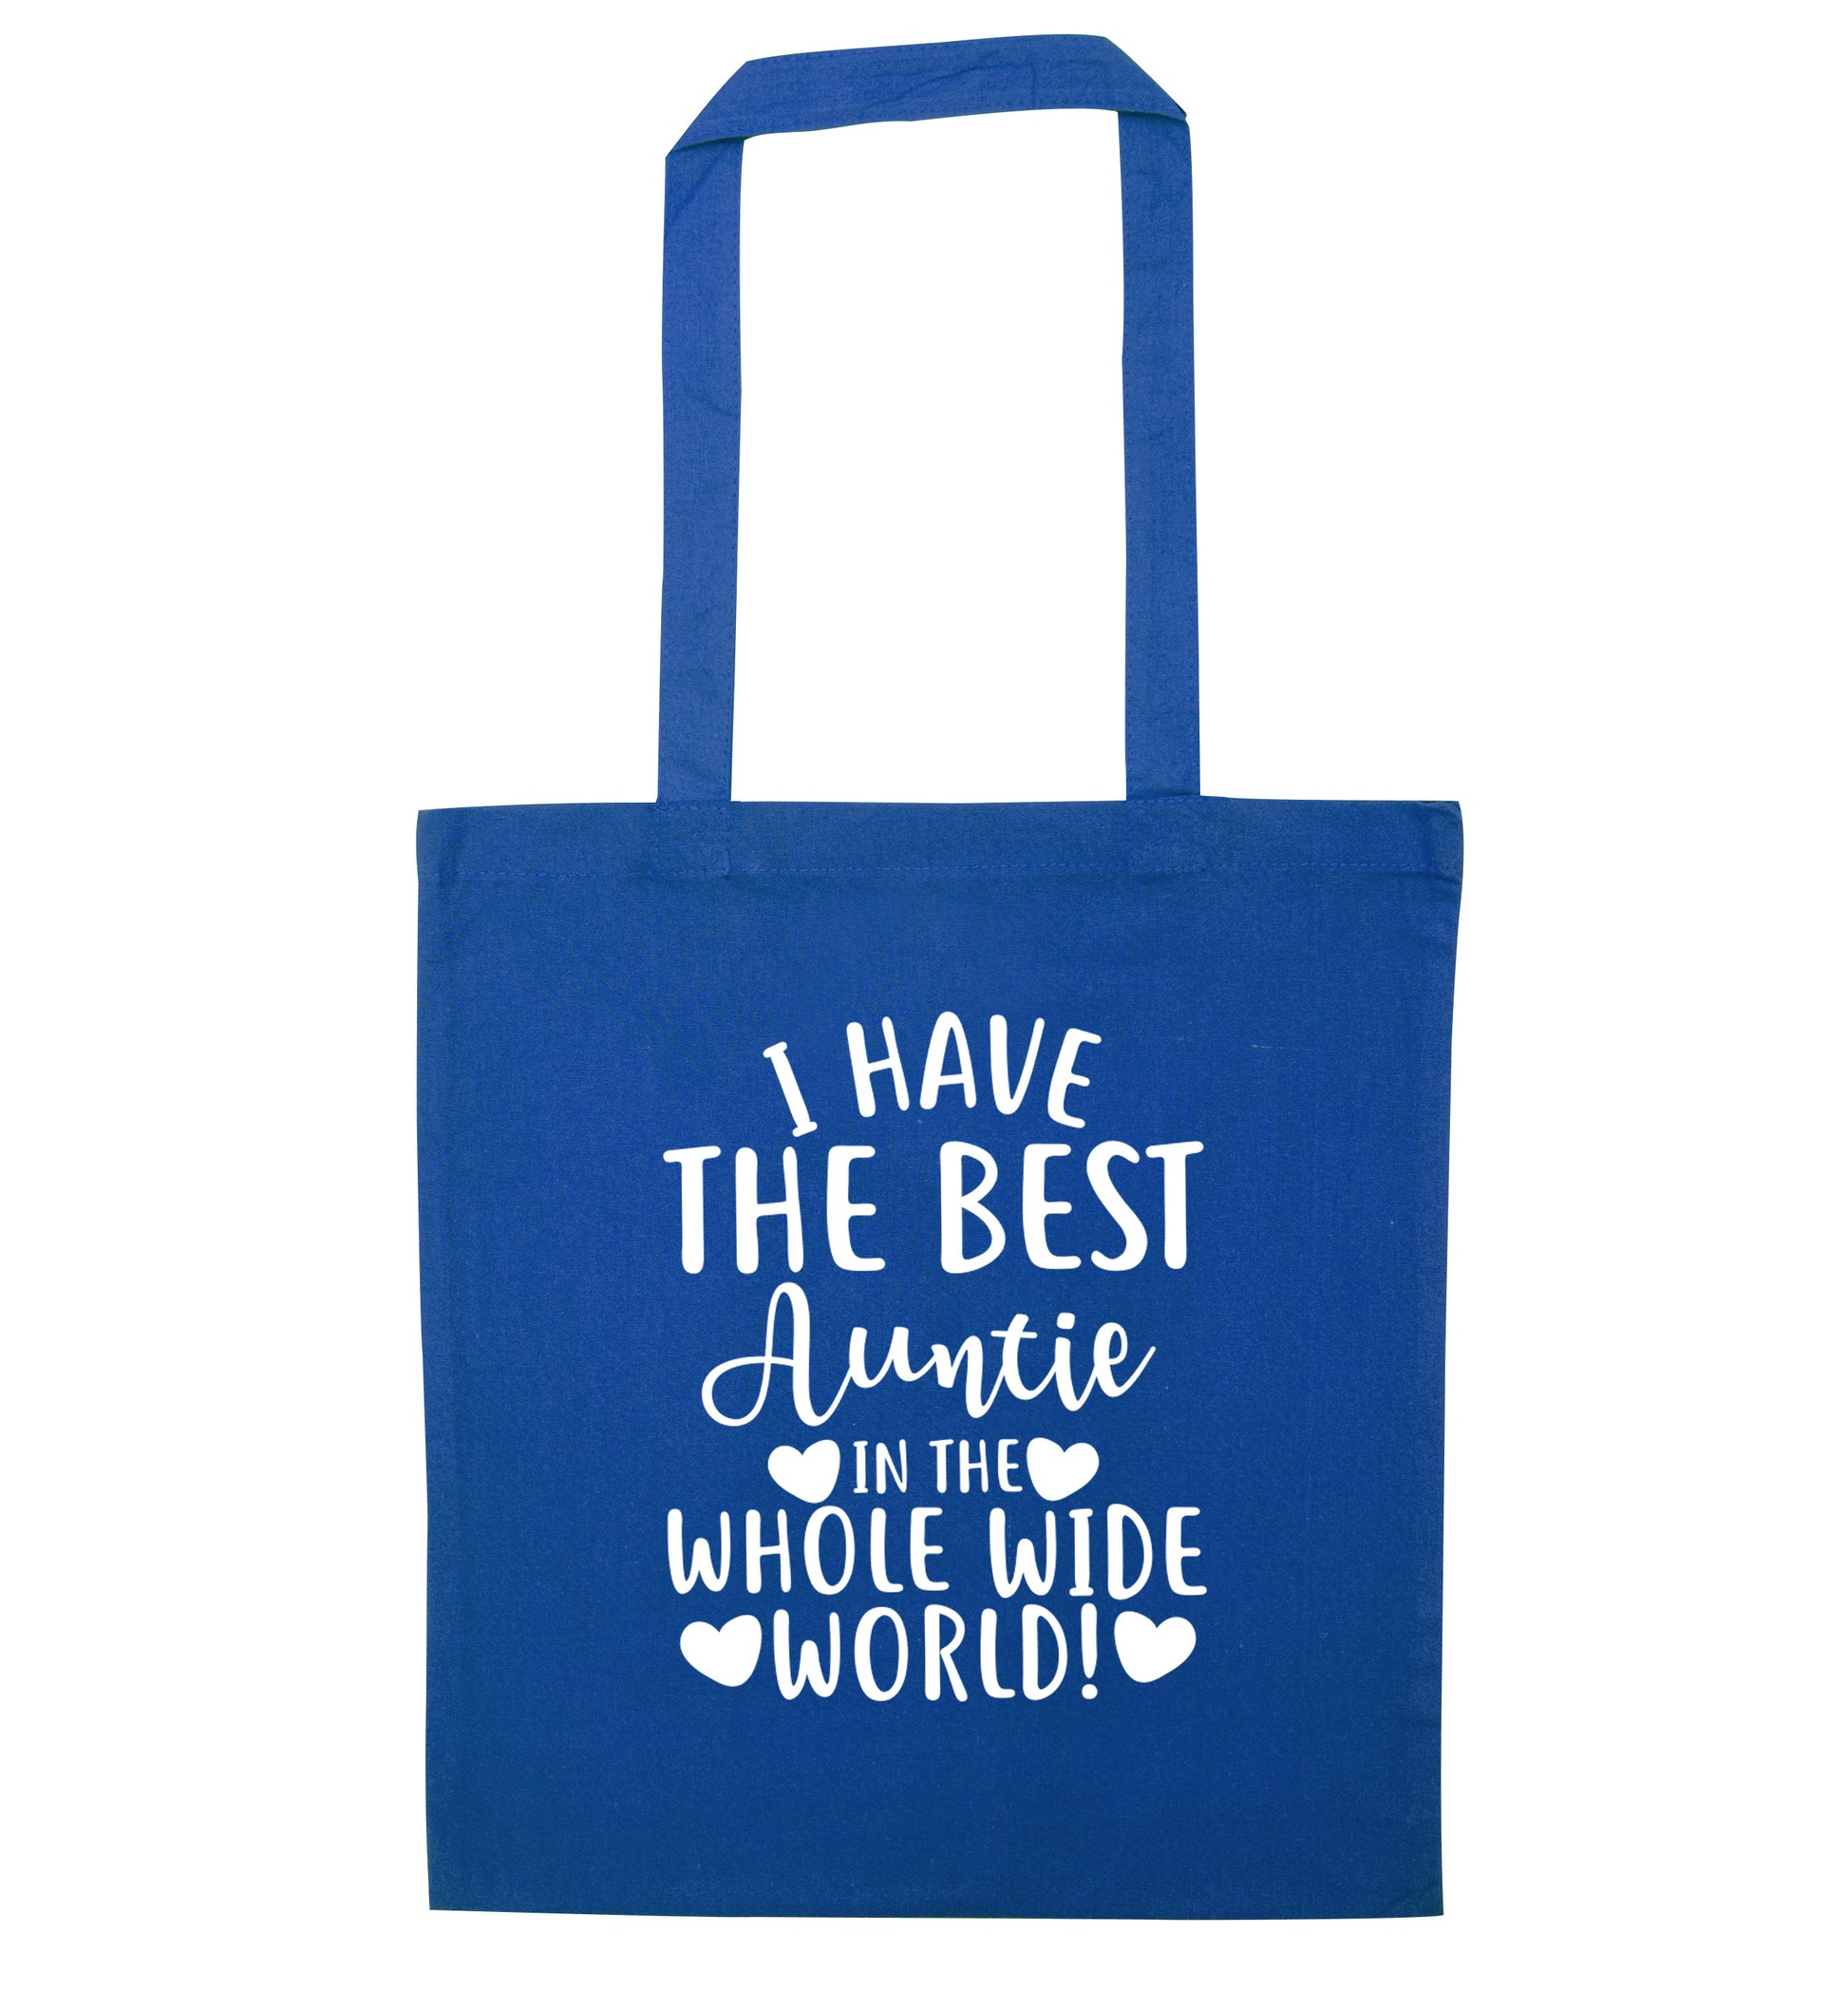 I have the best auntie in the whole wide world! blue tote bag